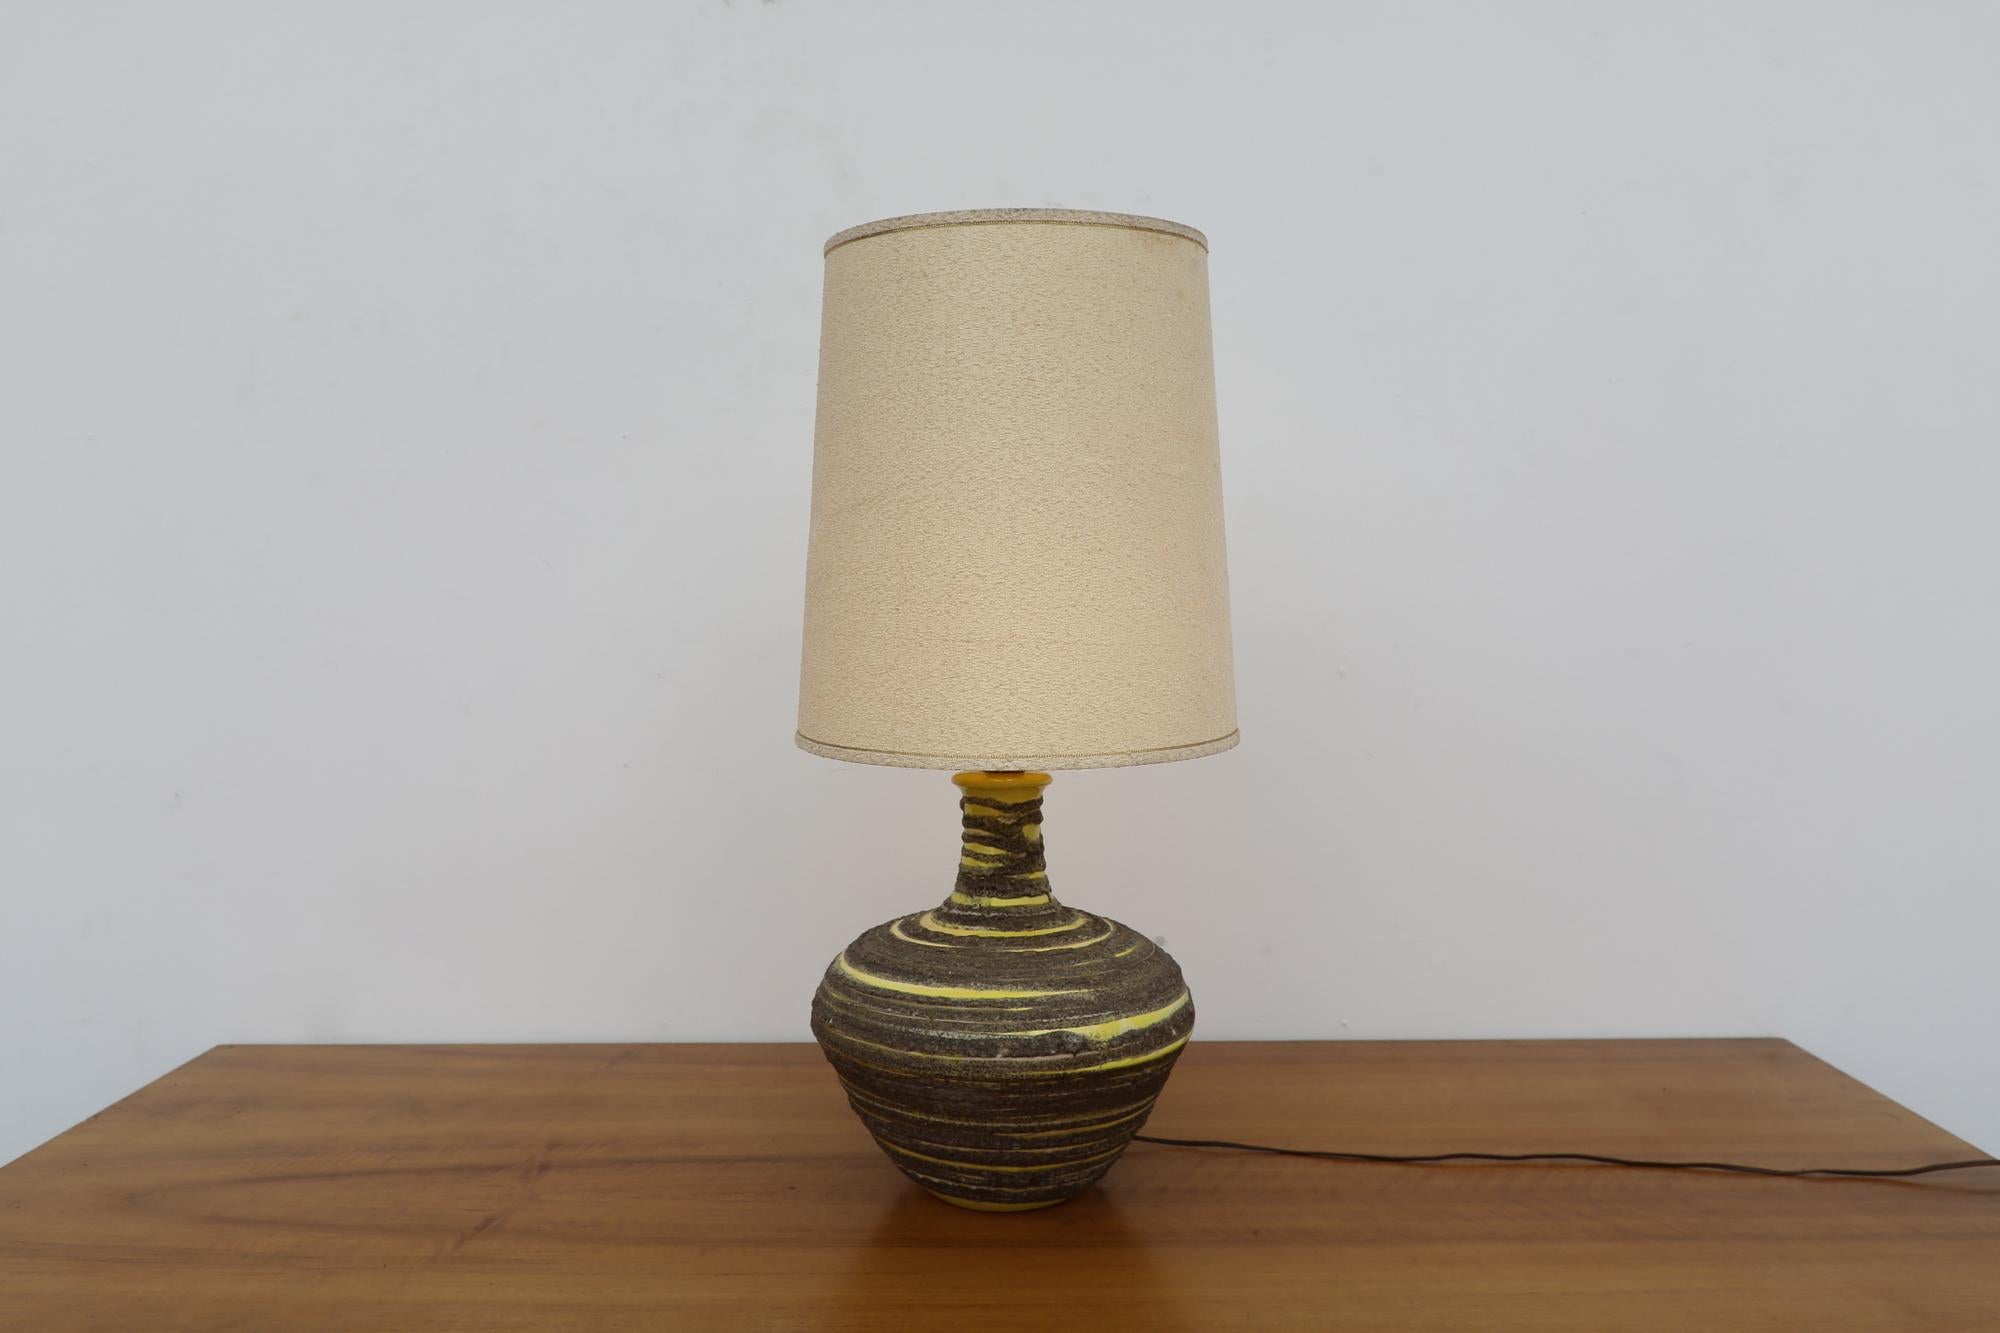 Mid-Century ceramic table lamp attractively lava glazed in yellow and grey swirl. With original shade. In impressive overall condition, with some visible wear consistent with its age and use. 